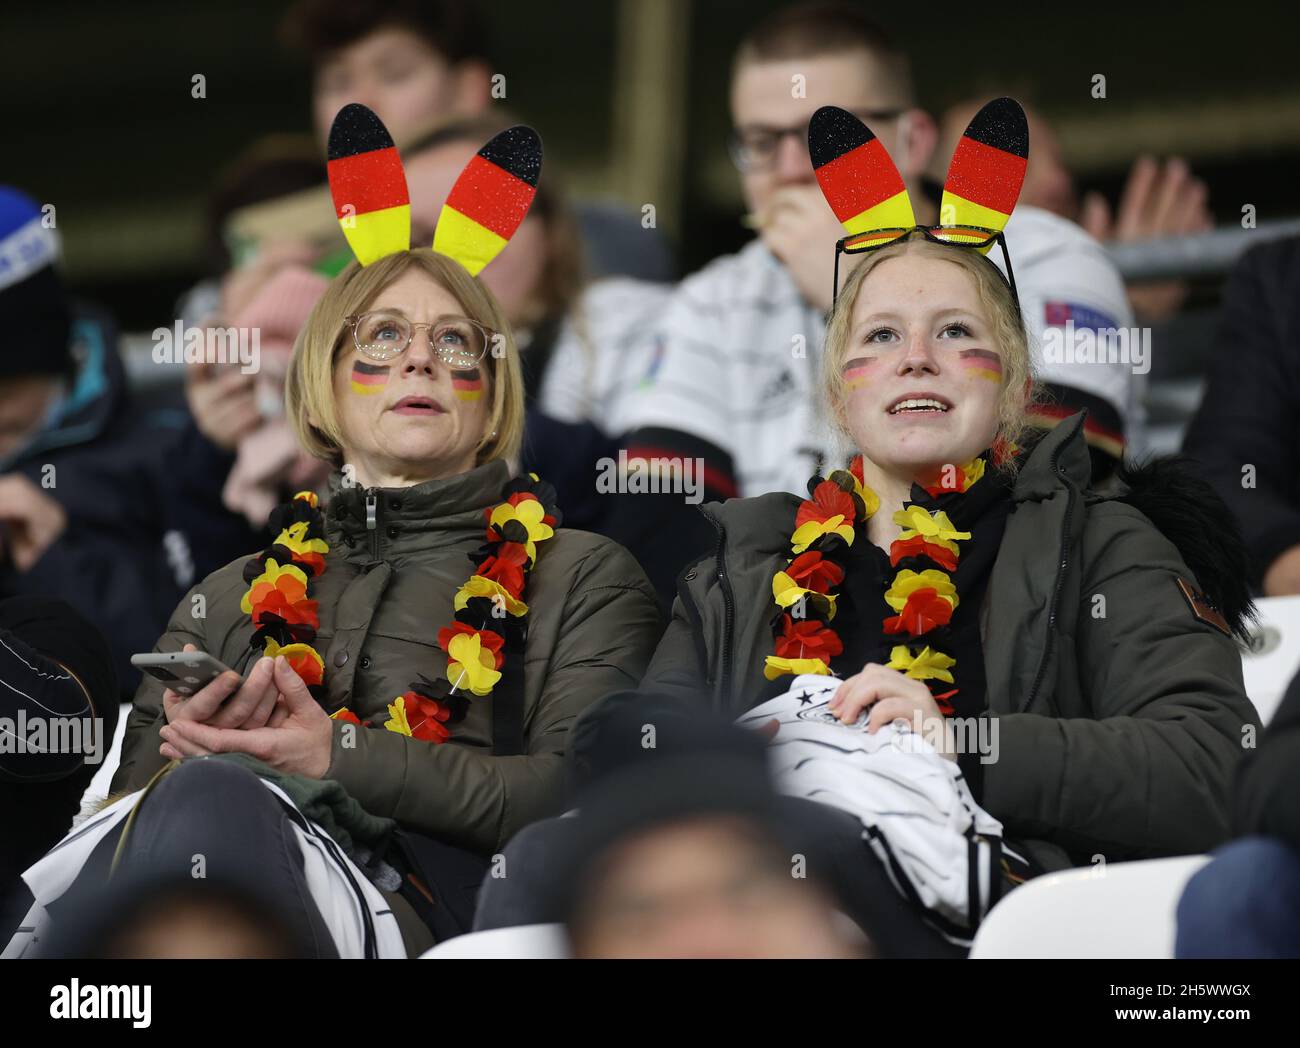 Wolfsburg, Germany. 11th Nov, 2021. Football: National Team, World Cup Qualification, Group Stage, Group J, Matchday 9, Germany - Liechtenstein at Volkswagen Arena. Two women have put on 'German' rabbit ears. Credit: Christian Charisius/dpa/Alamy Live News Stock Photo